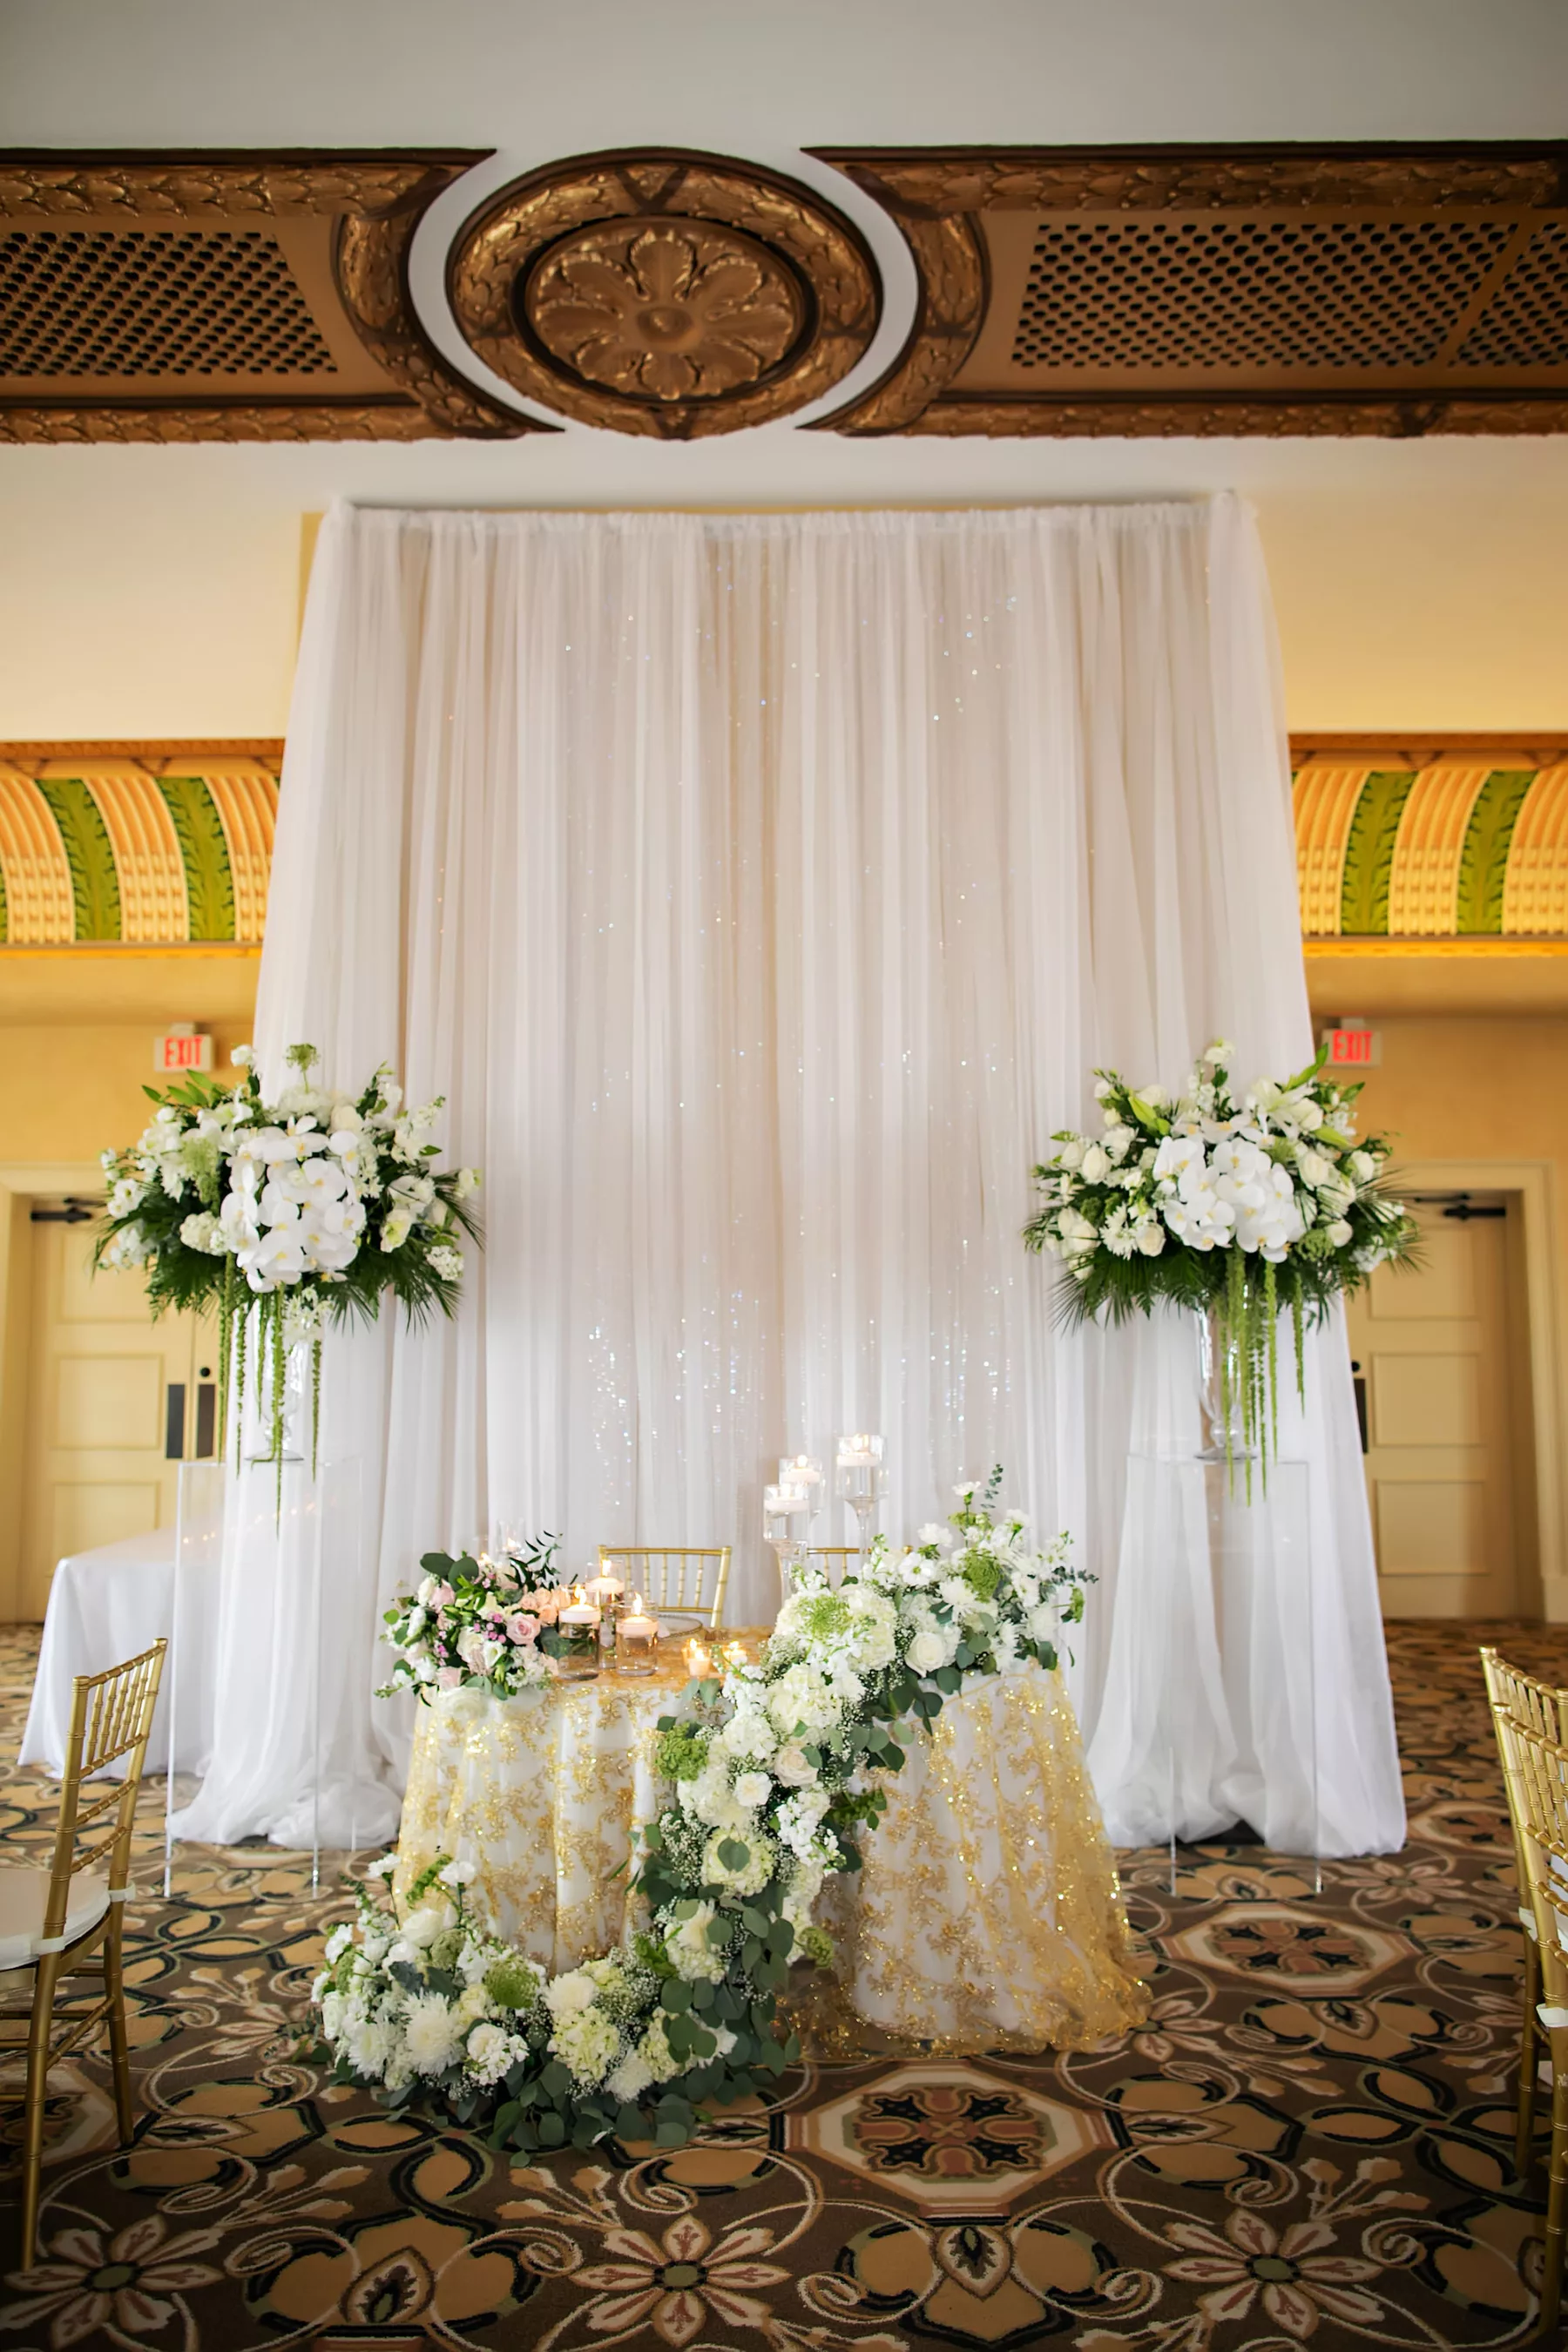 Classic White Wedding Reception Decor Ideas | White Drapery Sweetheart Table Backdrop Inspiration | Gold Sequin Tablecloth | White Orchid, Baby's Breath, Roses, and Greenery Floral Arrangement Ideas | Tampa Bay Event Planner Coastal Coordinating